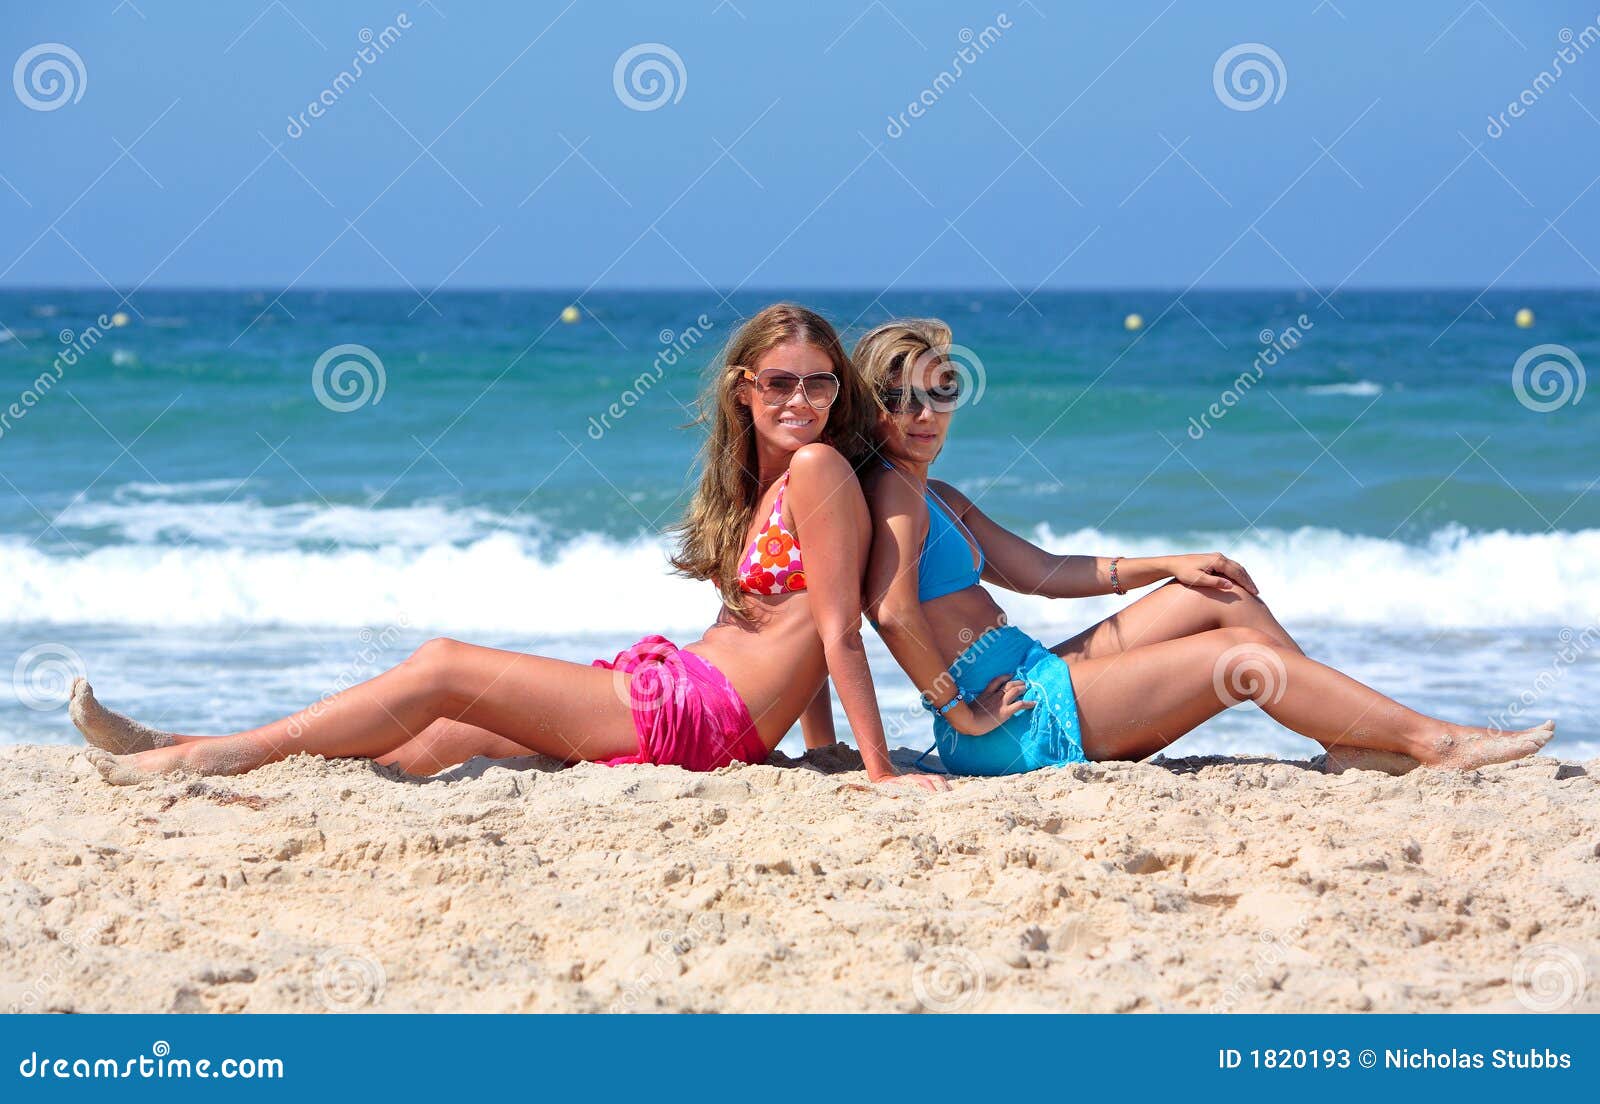 Two Young and Healthy Girls Sitting on a Sunny Beach Stock Image picture